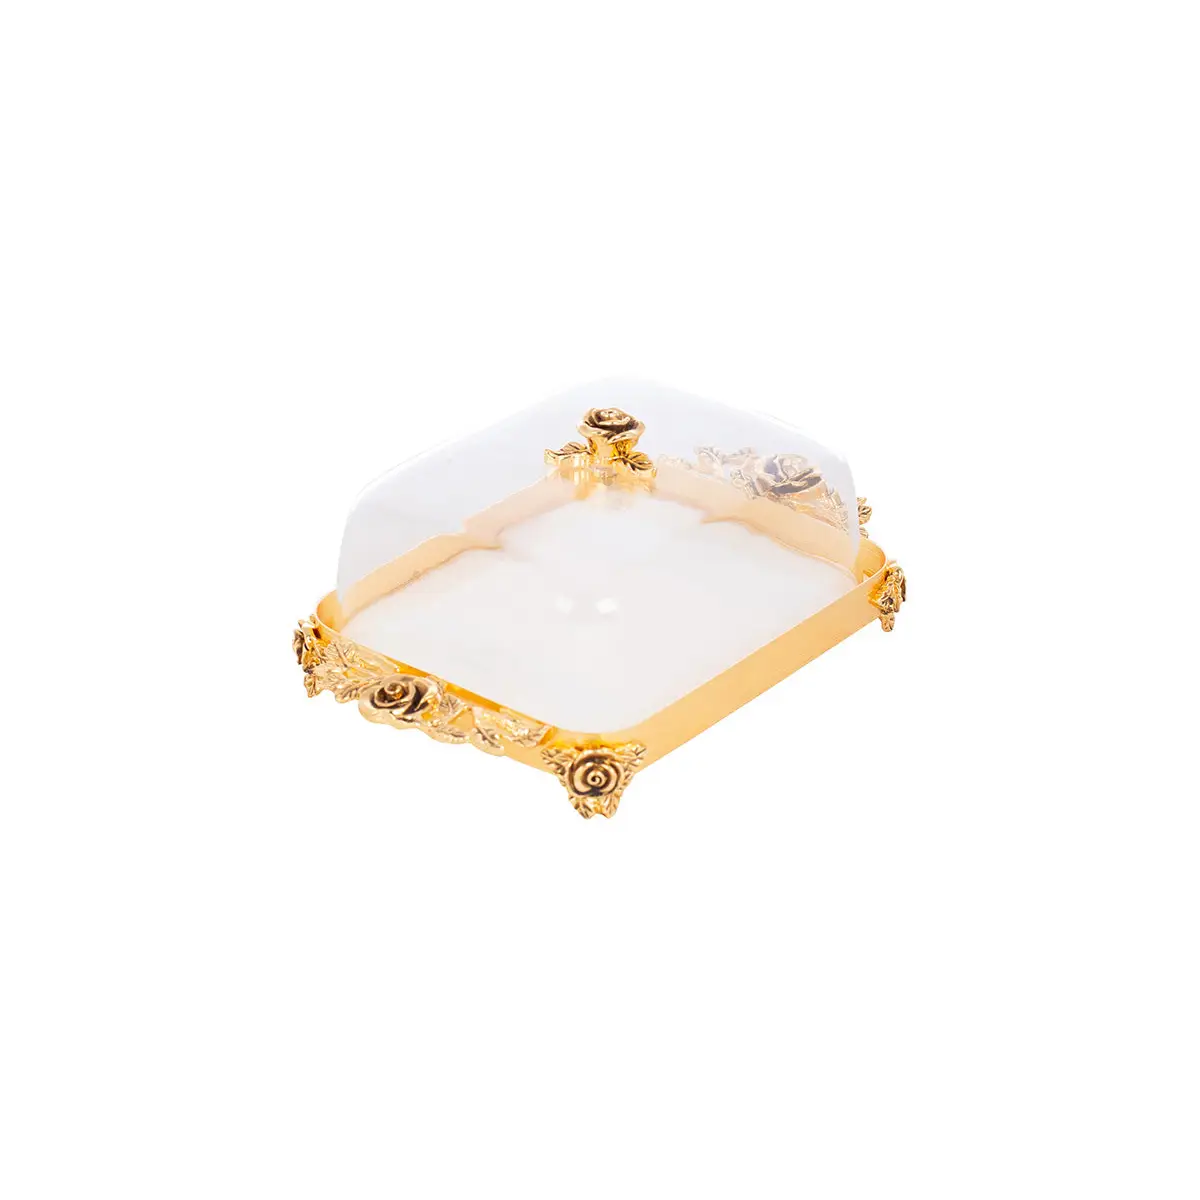 GOLD PLATED BUTTER DISH - ROSE COLLECTION